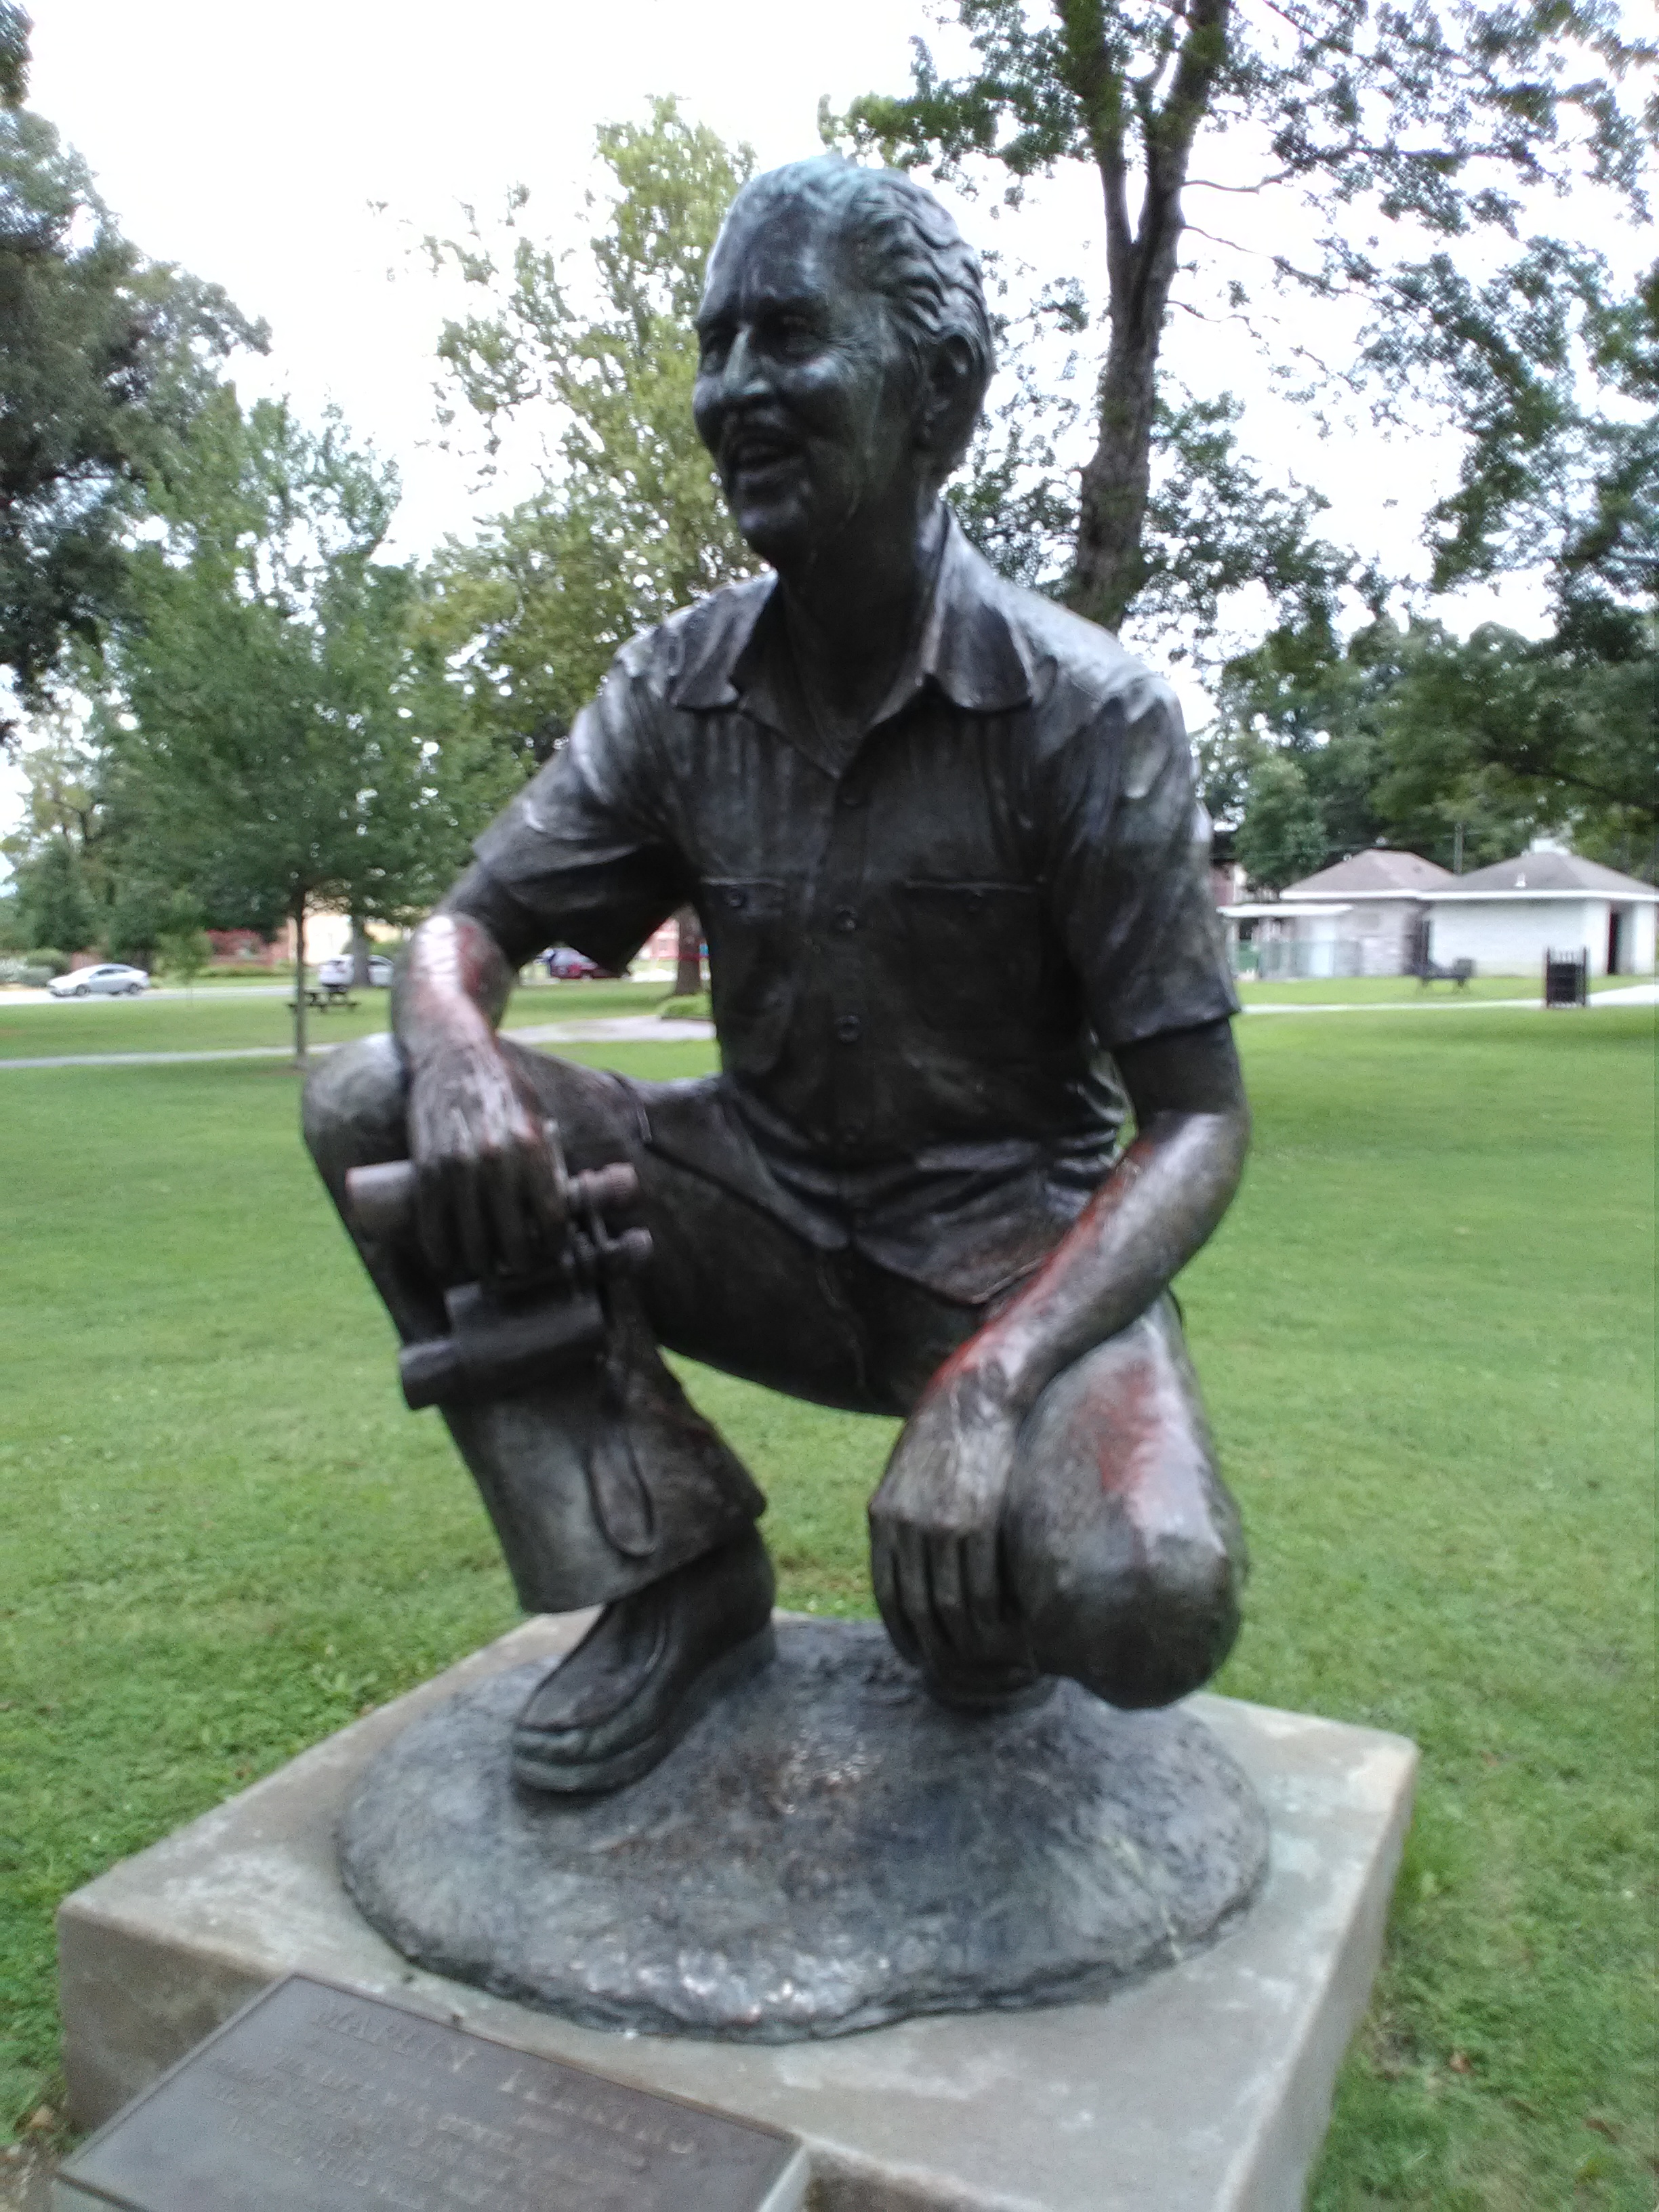 Carthage native R. Marlin Perkins is memorialized with this statue located on the western side of Central Park.